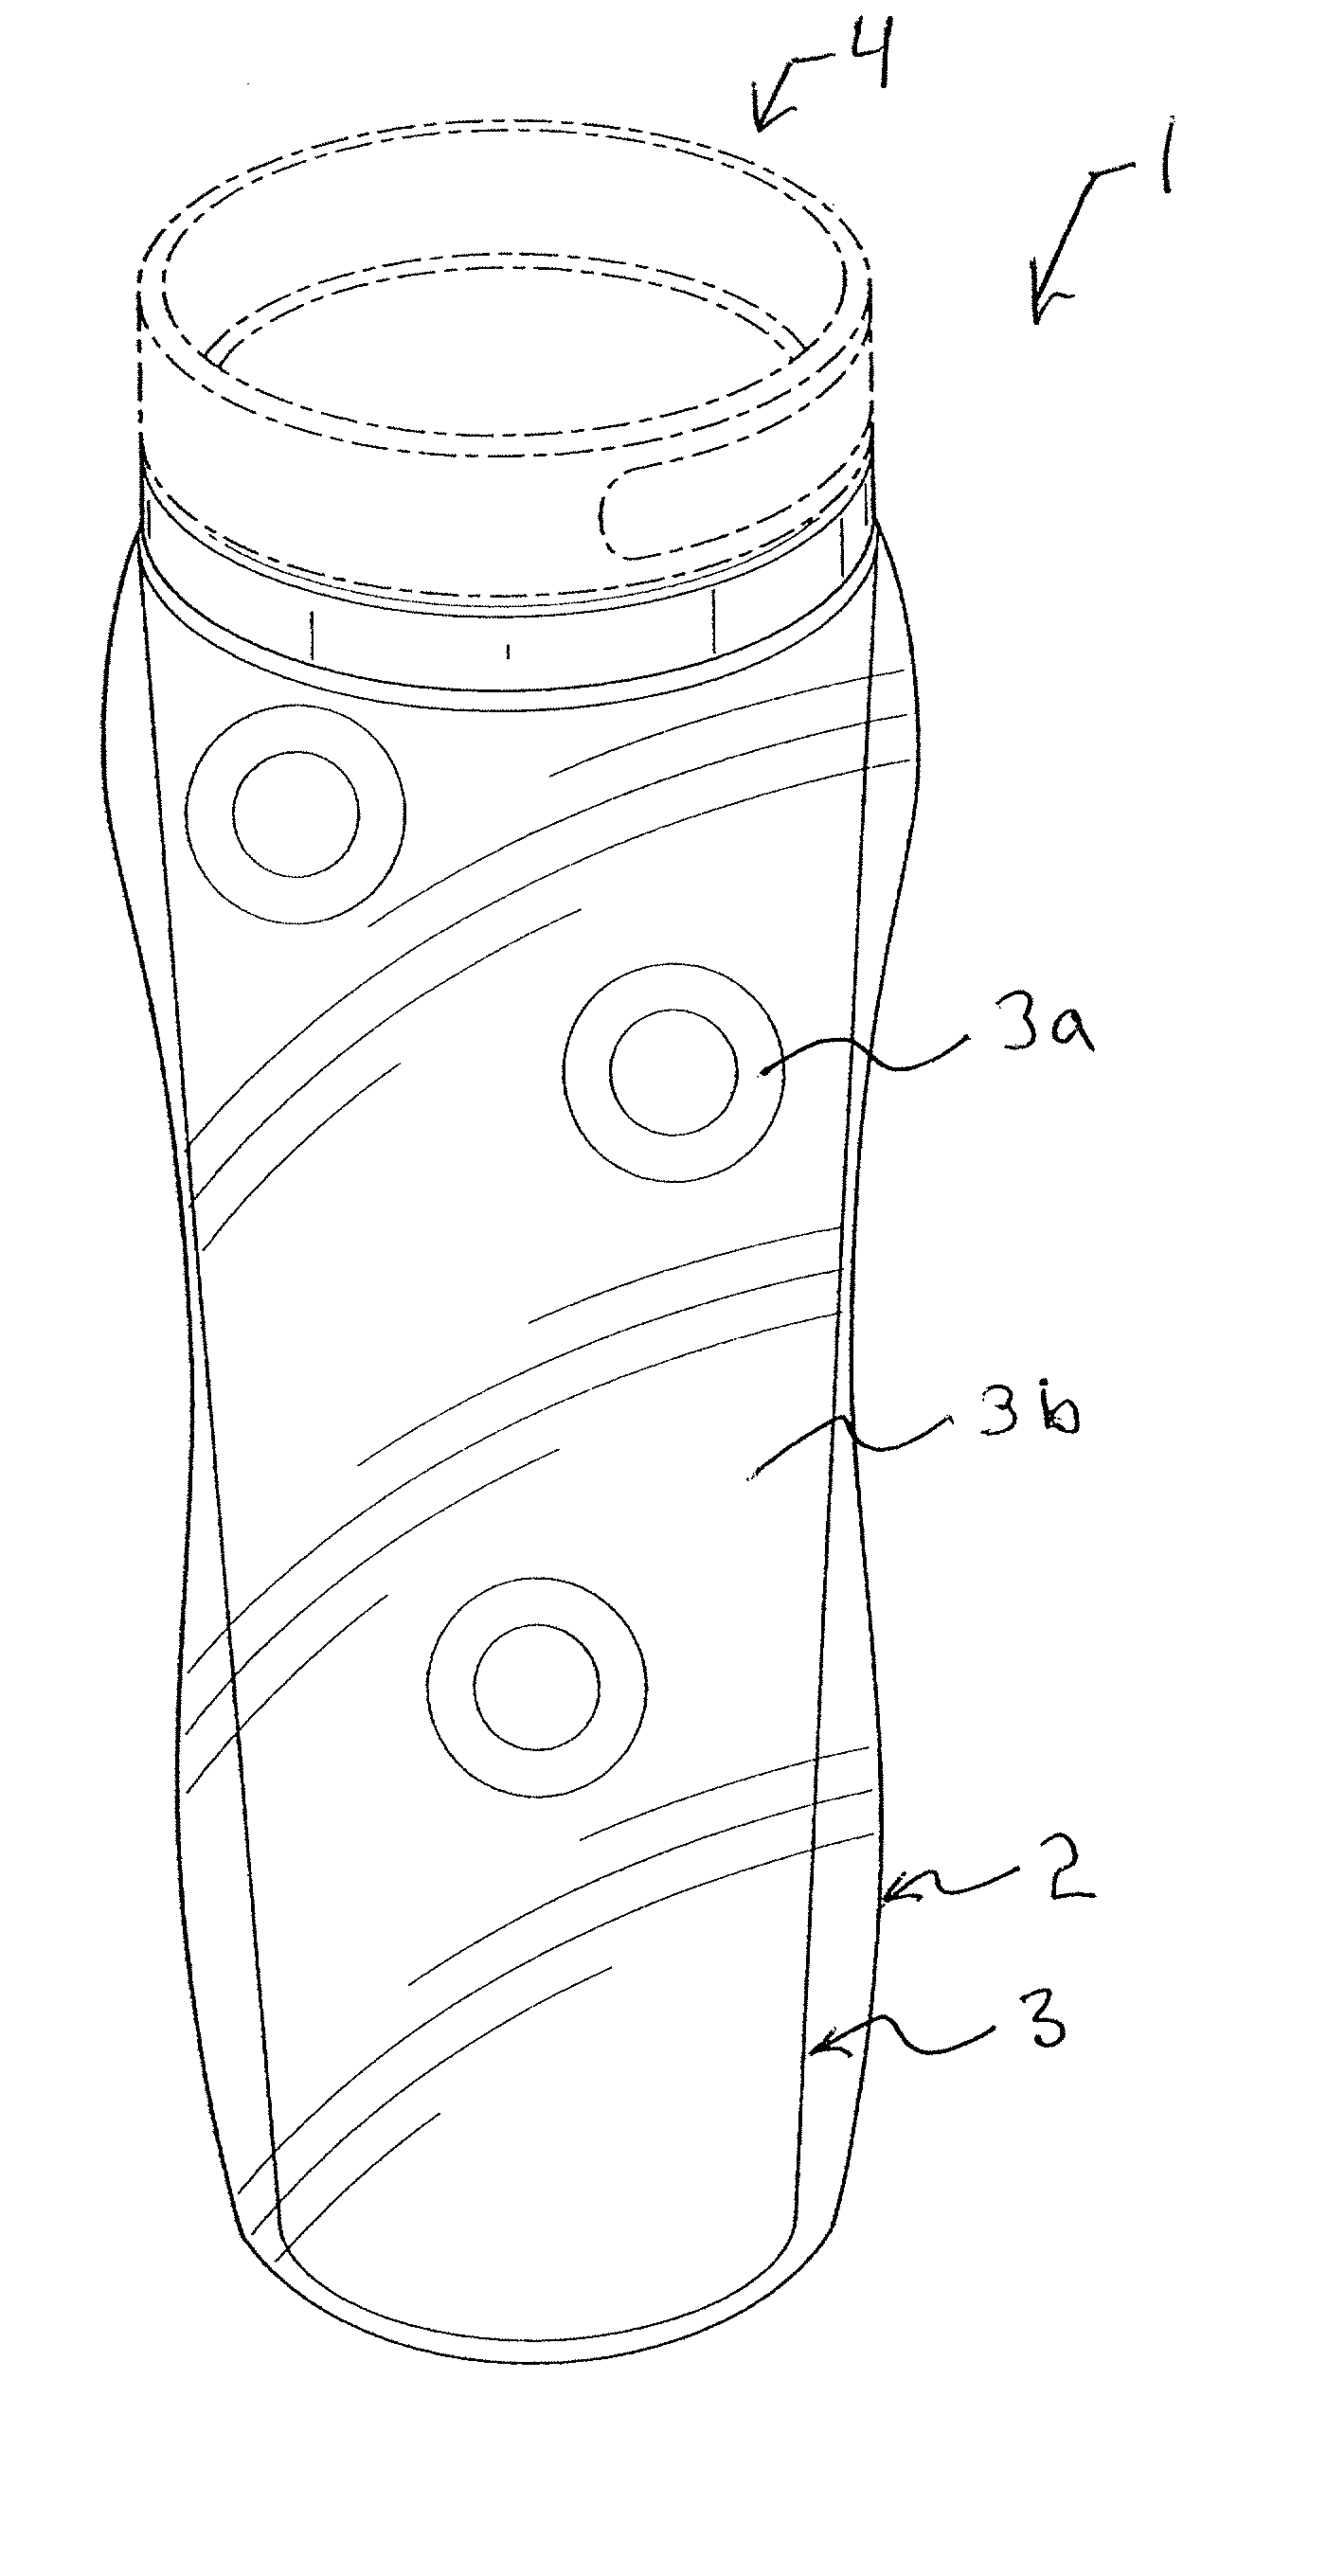 Dual-wall container with heat activated and/or temperature-change activated color changing capability